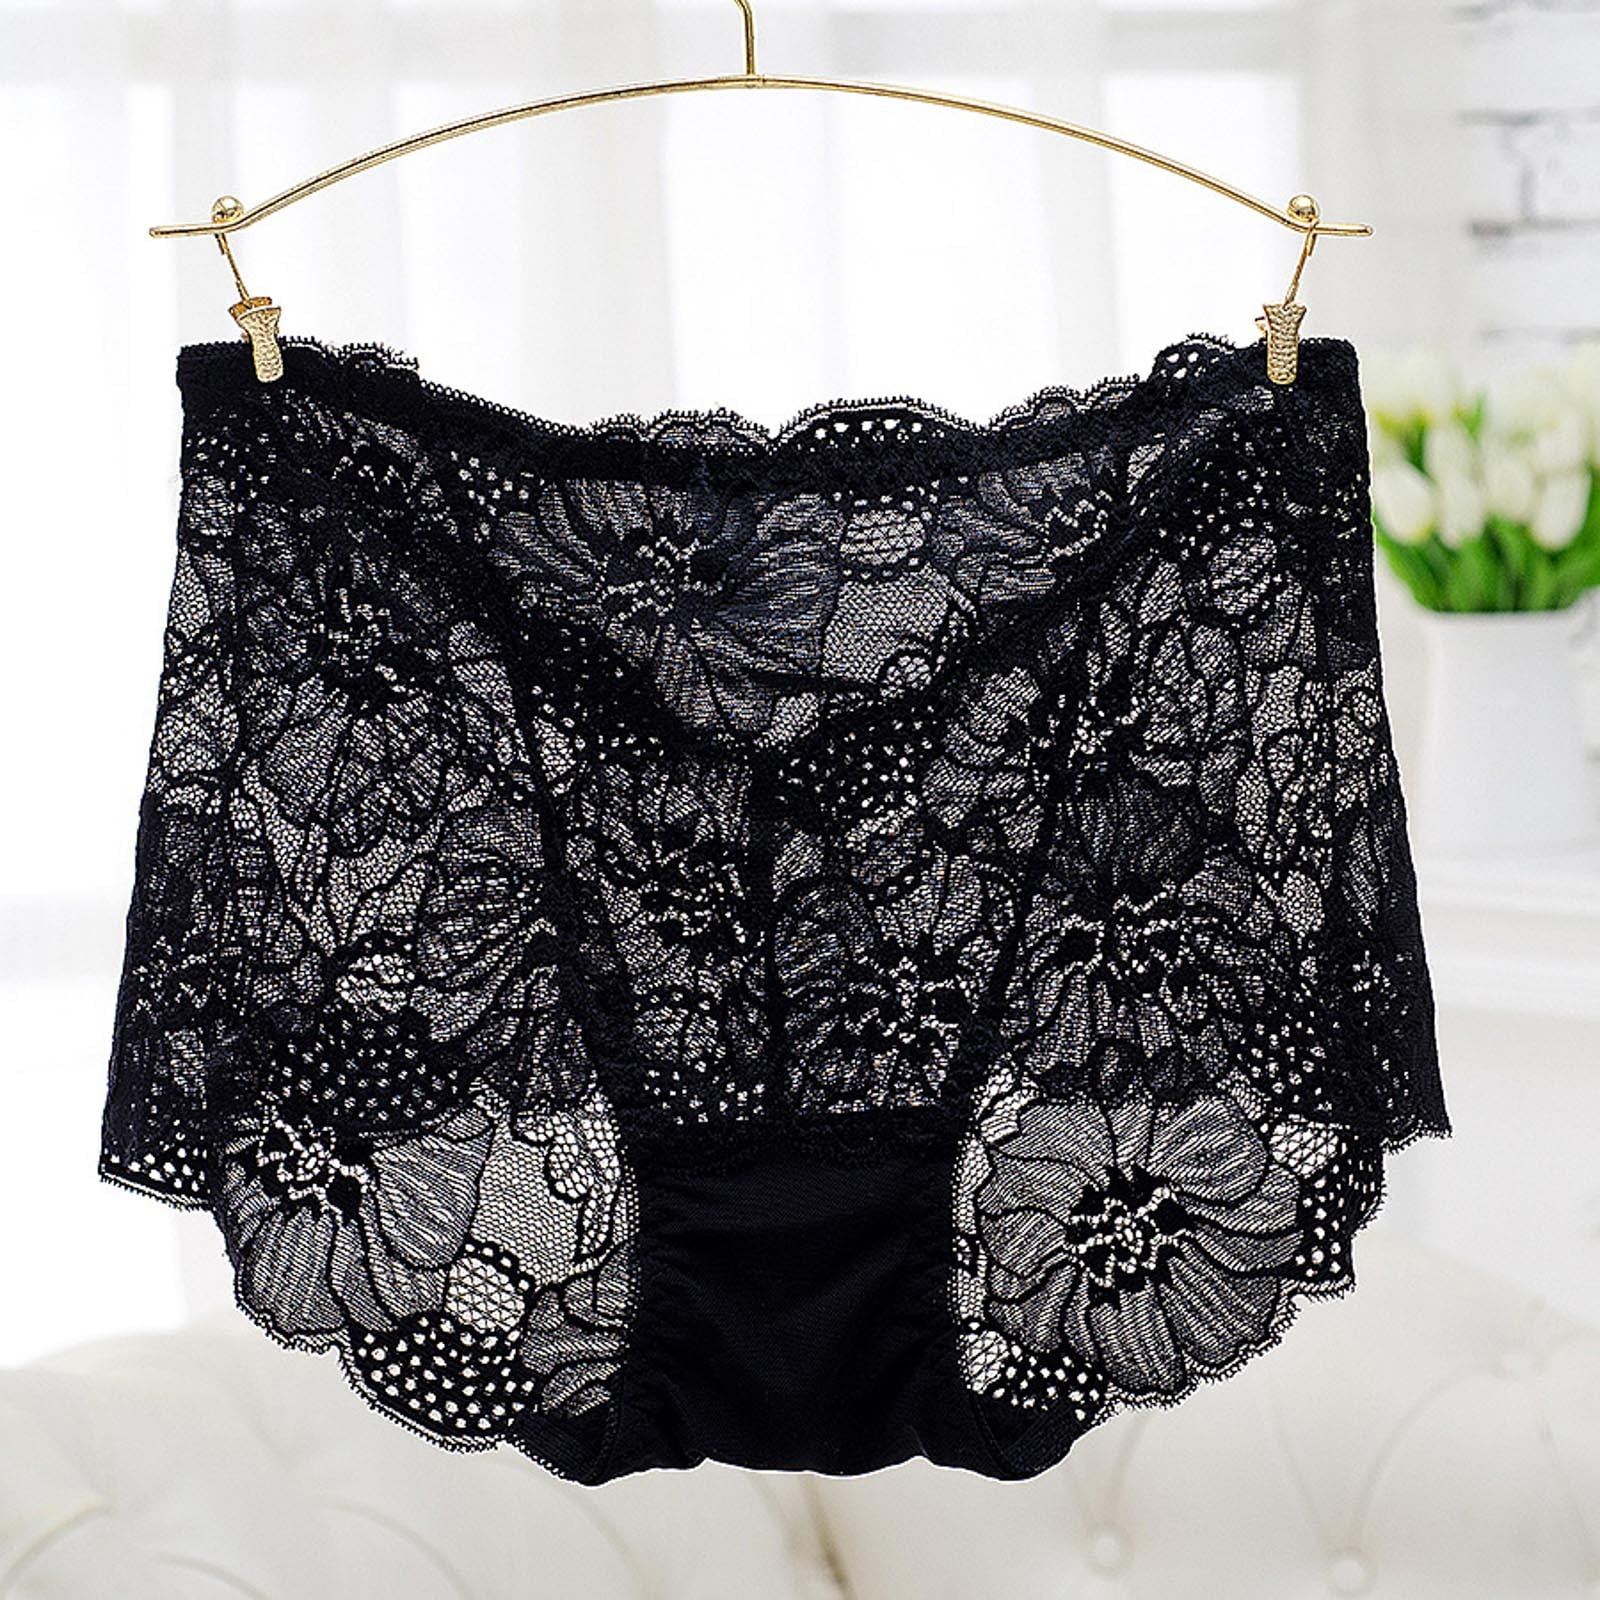 Black Dog Print Underwear Women Lightweight Thin Soft Novelty Cheeky Panties  Ladies Bachelorette Party Funny Sexy Hipster Panties Casual Black Lace Edge  Waistband Briefs Underwear at  Women's Clothing store